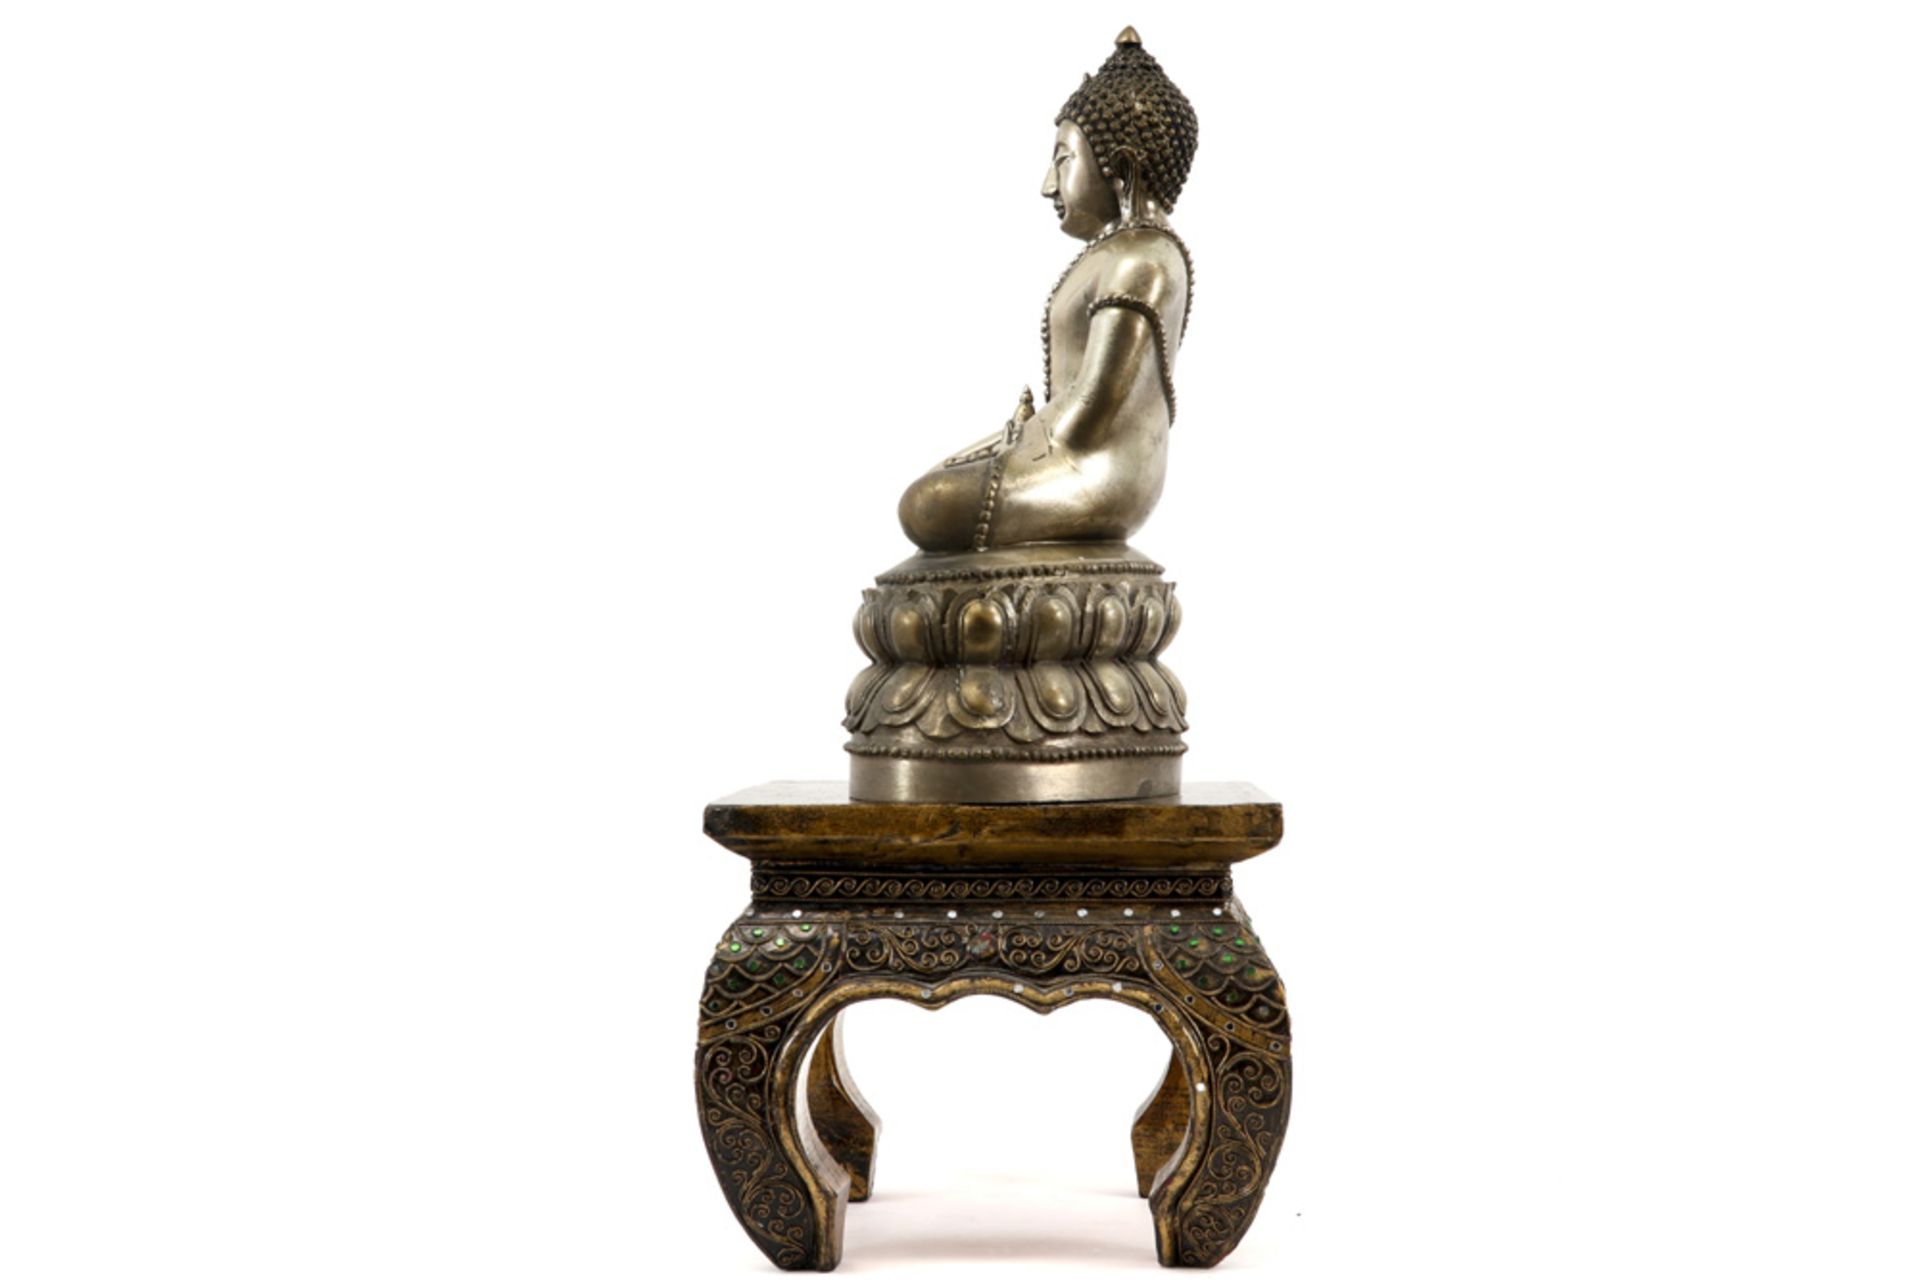 Burmese Shan style "Buddha" sculpture in silverplated bronze - on a gilded stand ||Birmaanse - Image 5 of 6